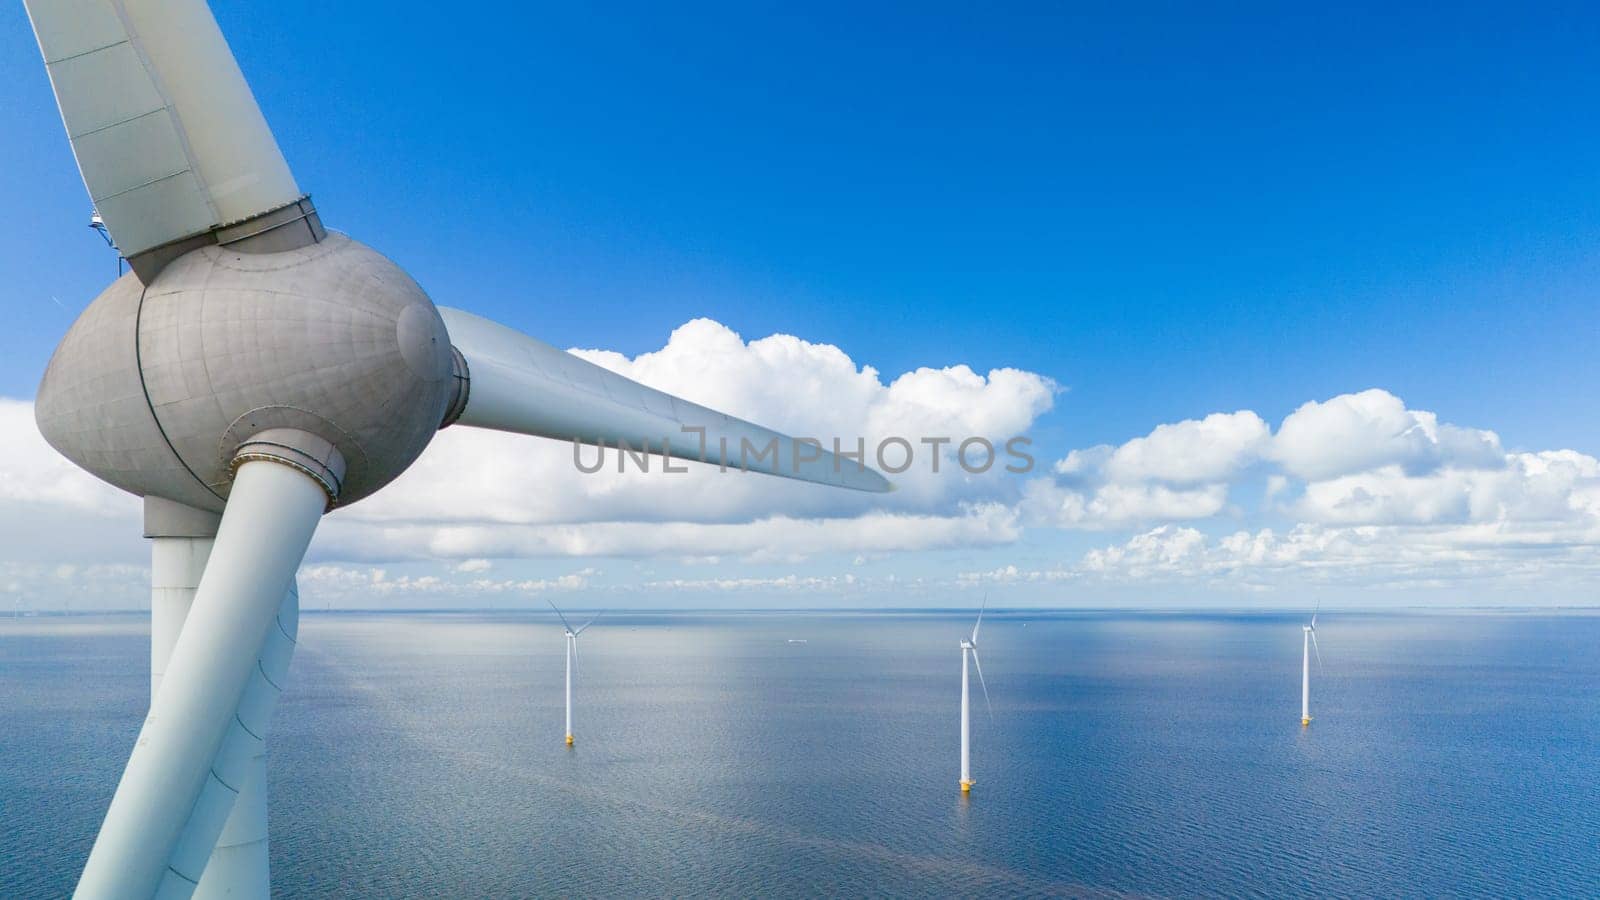 A single wind turbine stands tall in the middle of the vast ocean, harnessing renewable energy while surrounded by an endless expanse of water under a clear blue sky by fokkebok